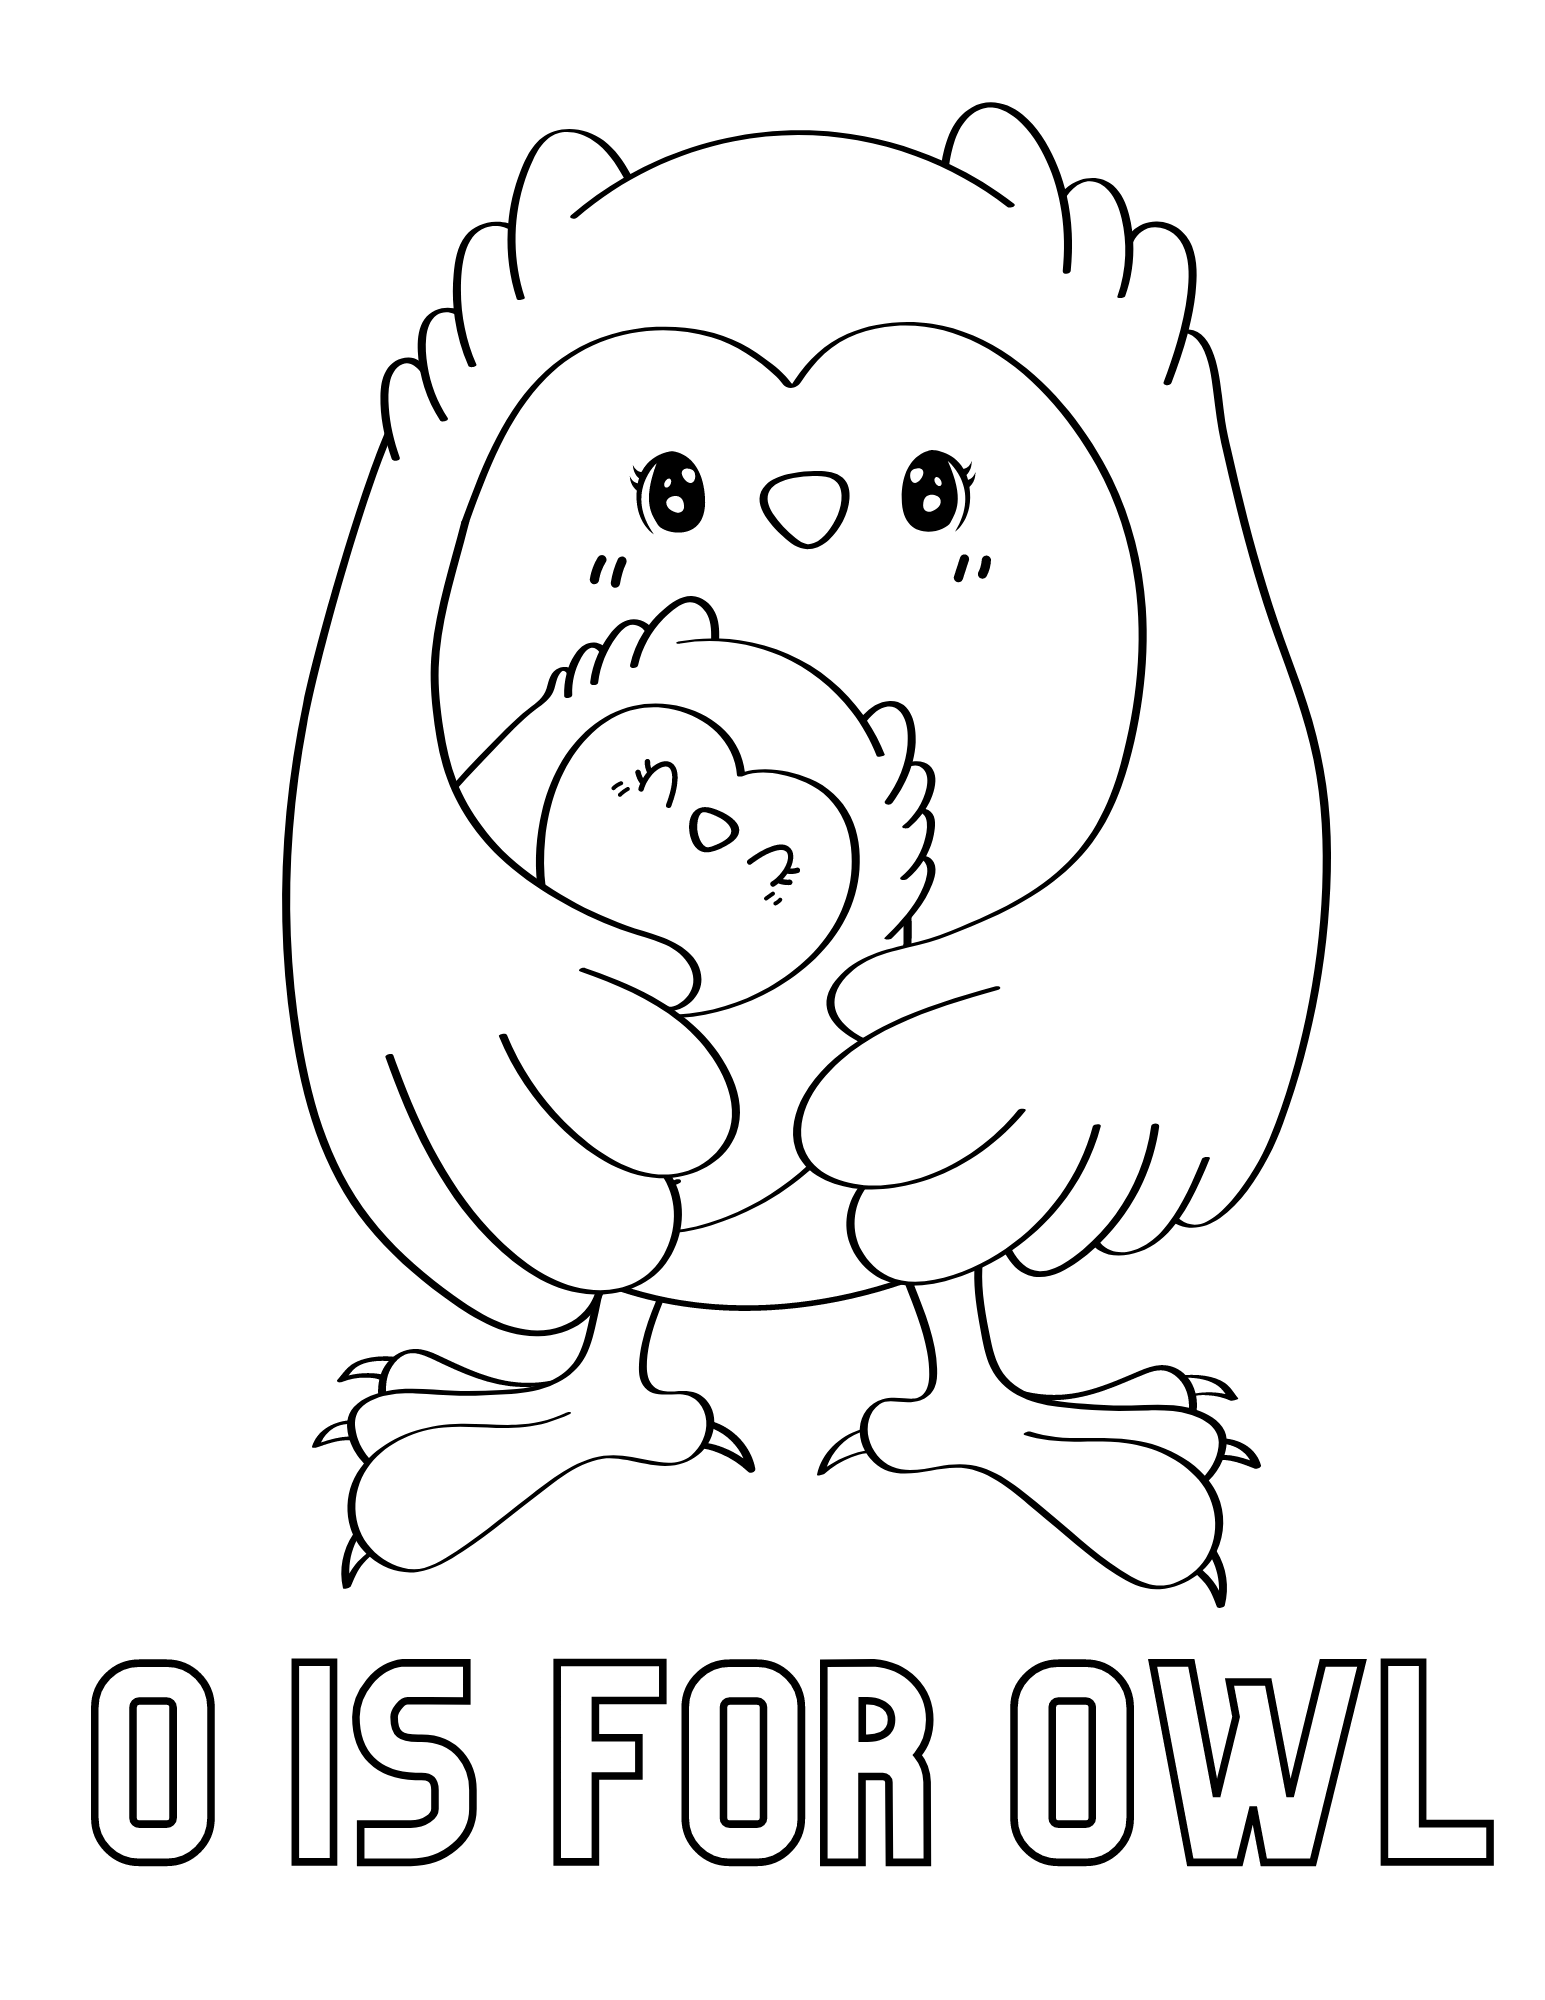 Fun owl facts and free printable owl coloring pages